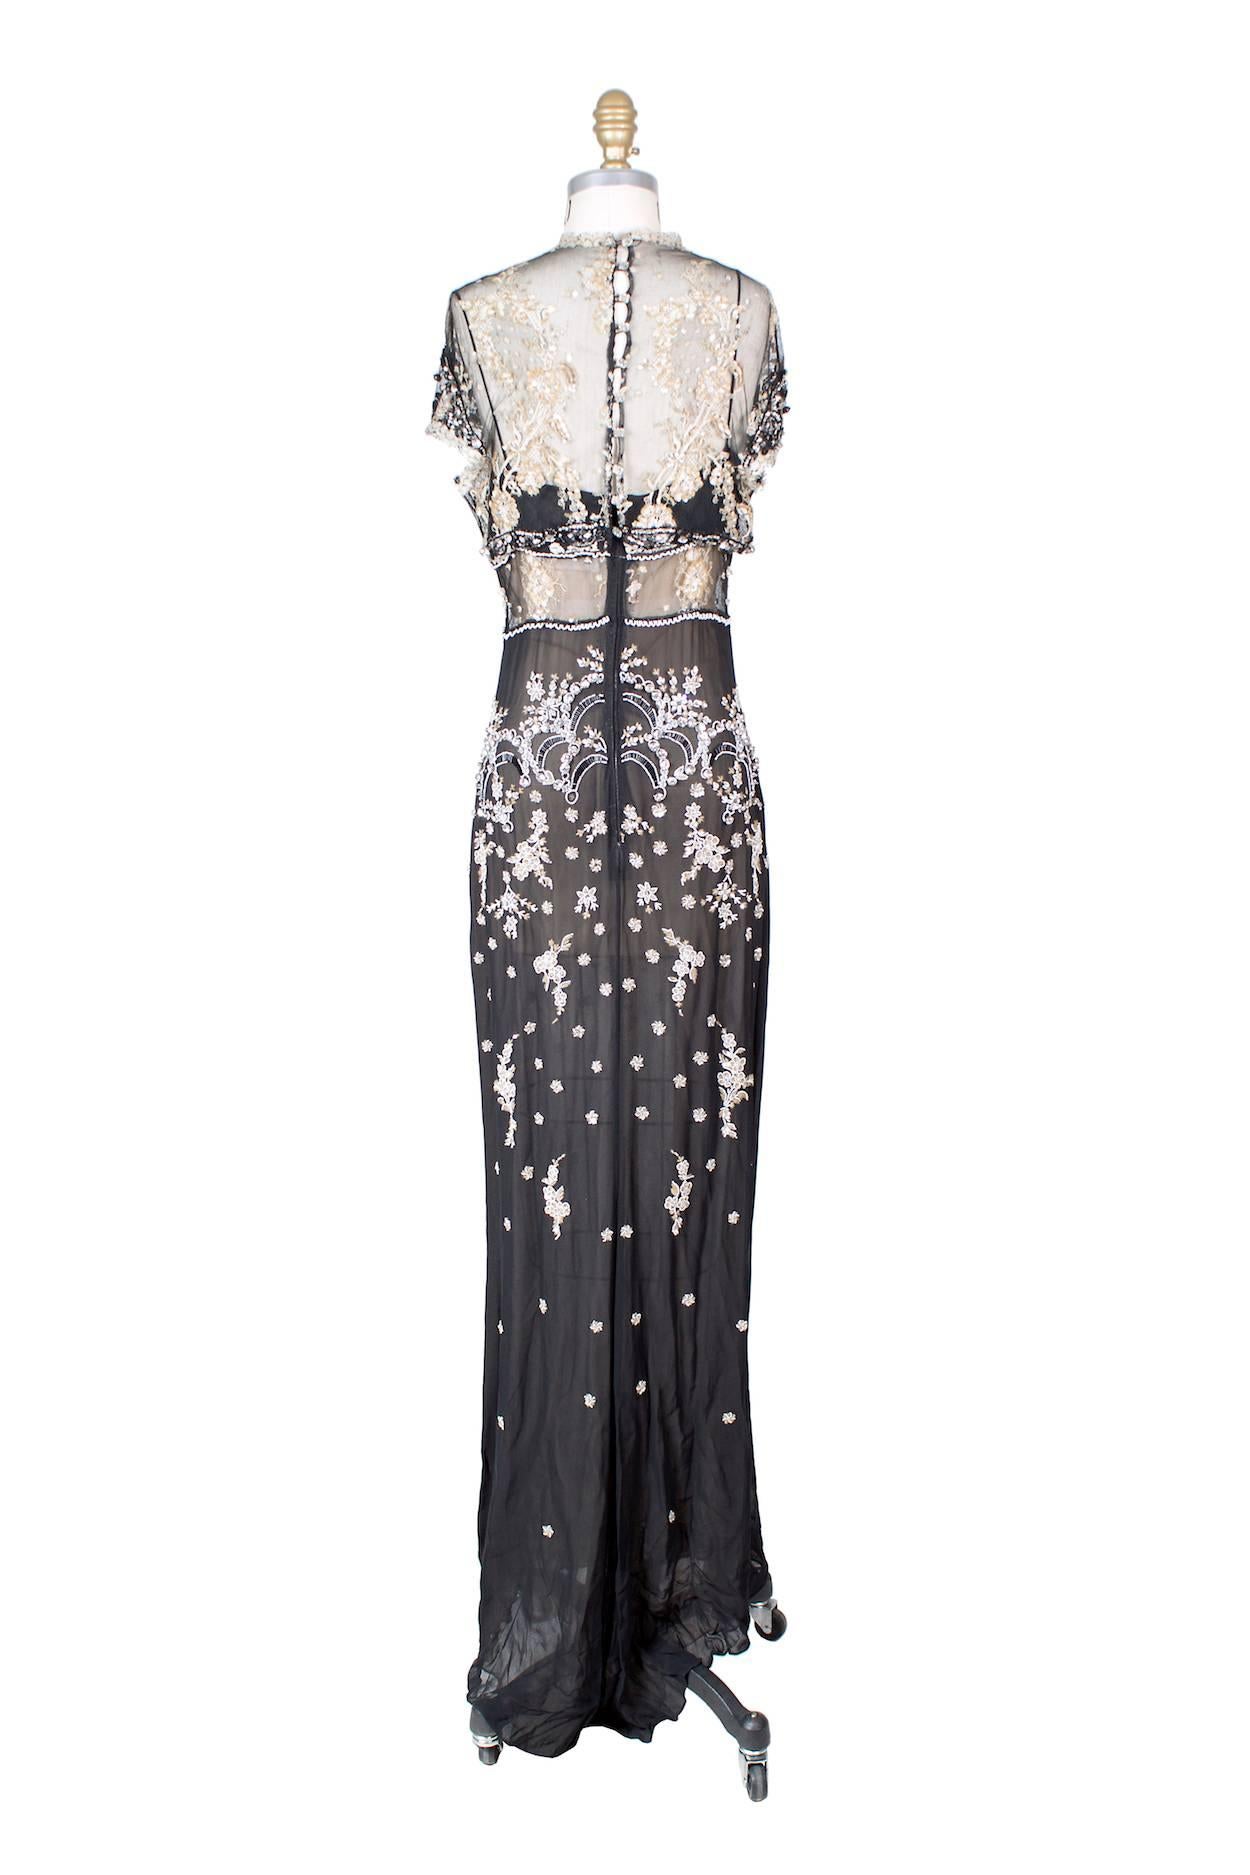 This is a contemporary dress by Badgley Mishka.  It features beaded and embroidered mesh and chiffon and includes an attached slip and lining.  The closure is a hidden zipper down the back with buttons.  